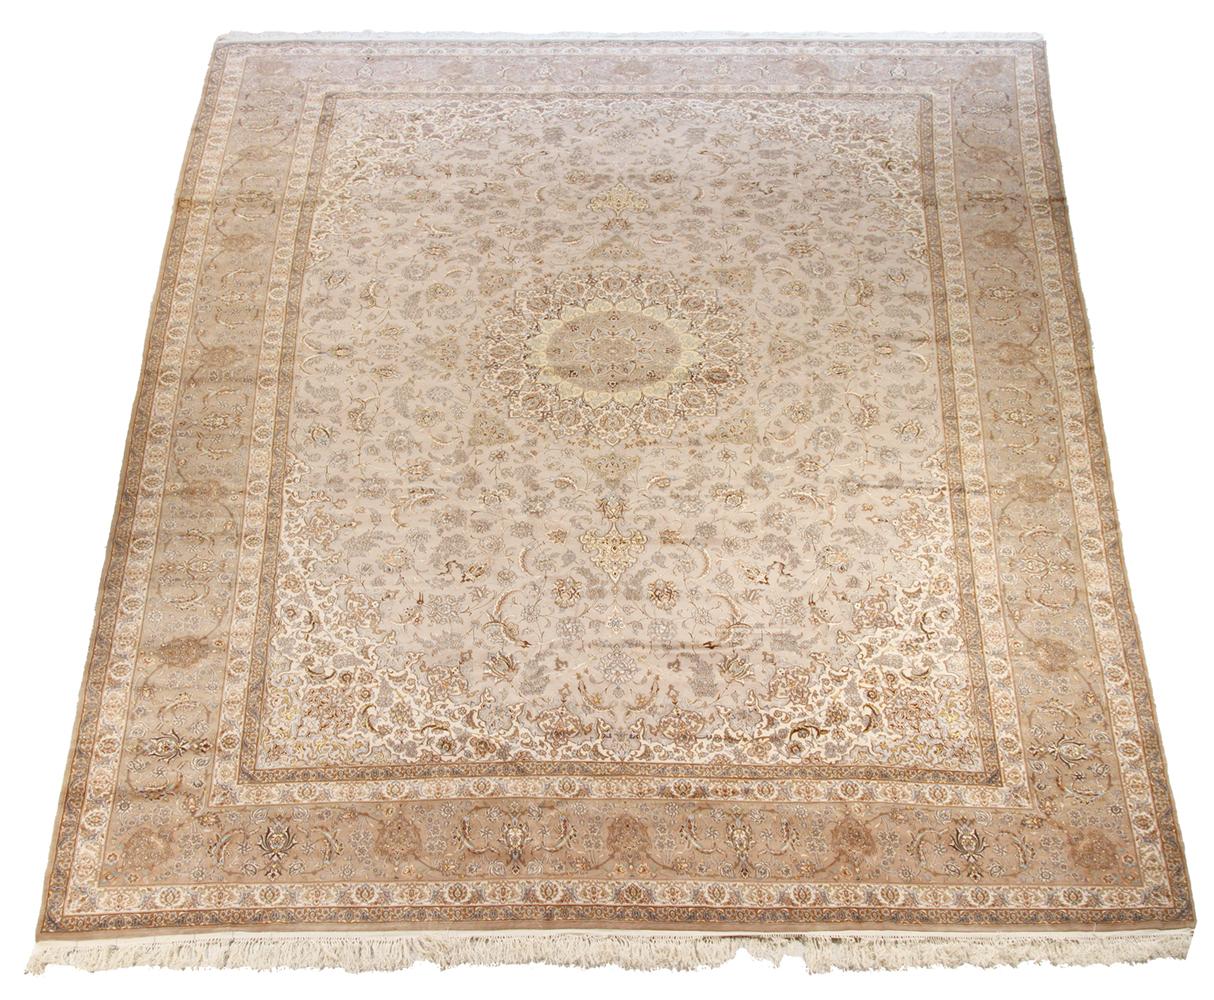 New Persian rug handwoven from the finest sheep’s wool and colored with all-natural vegetable dyes that are safe for humans and pets. It’s a traditional Isfahan design featuring brown and gray floral details. It’s a stunning piece for decorating